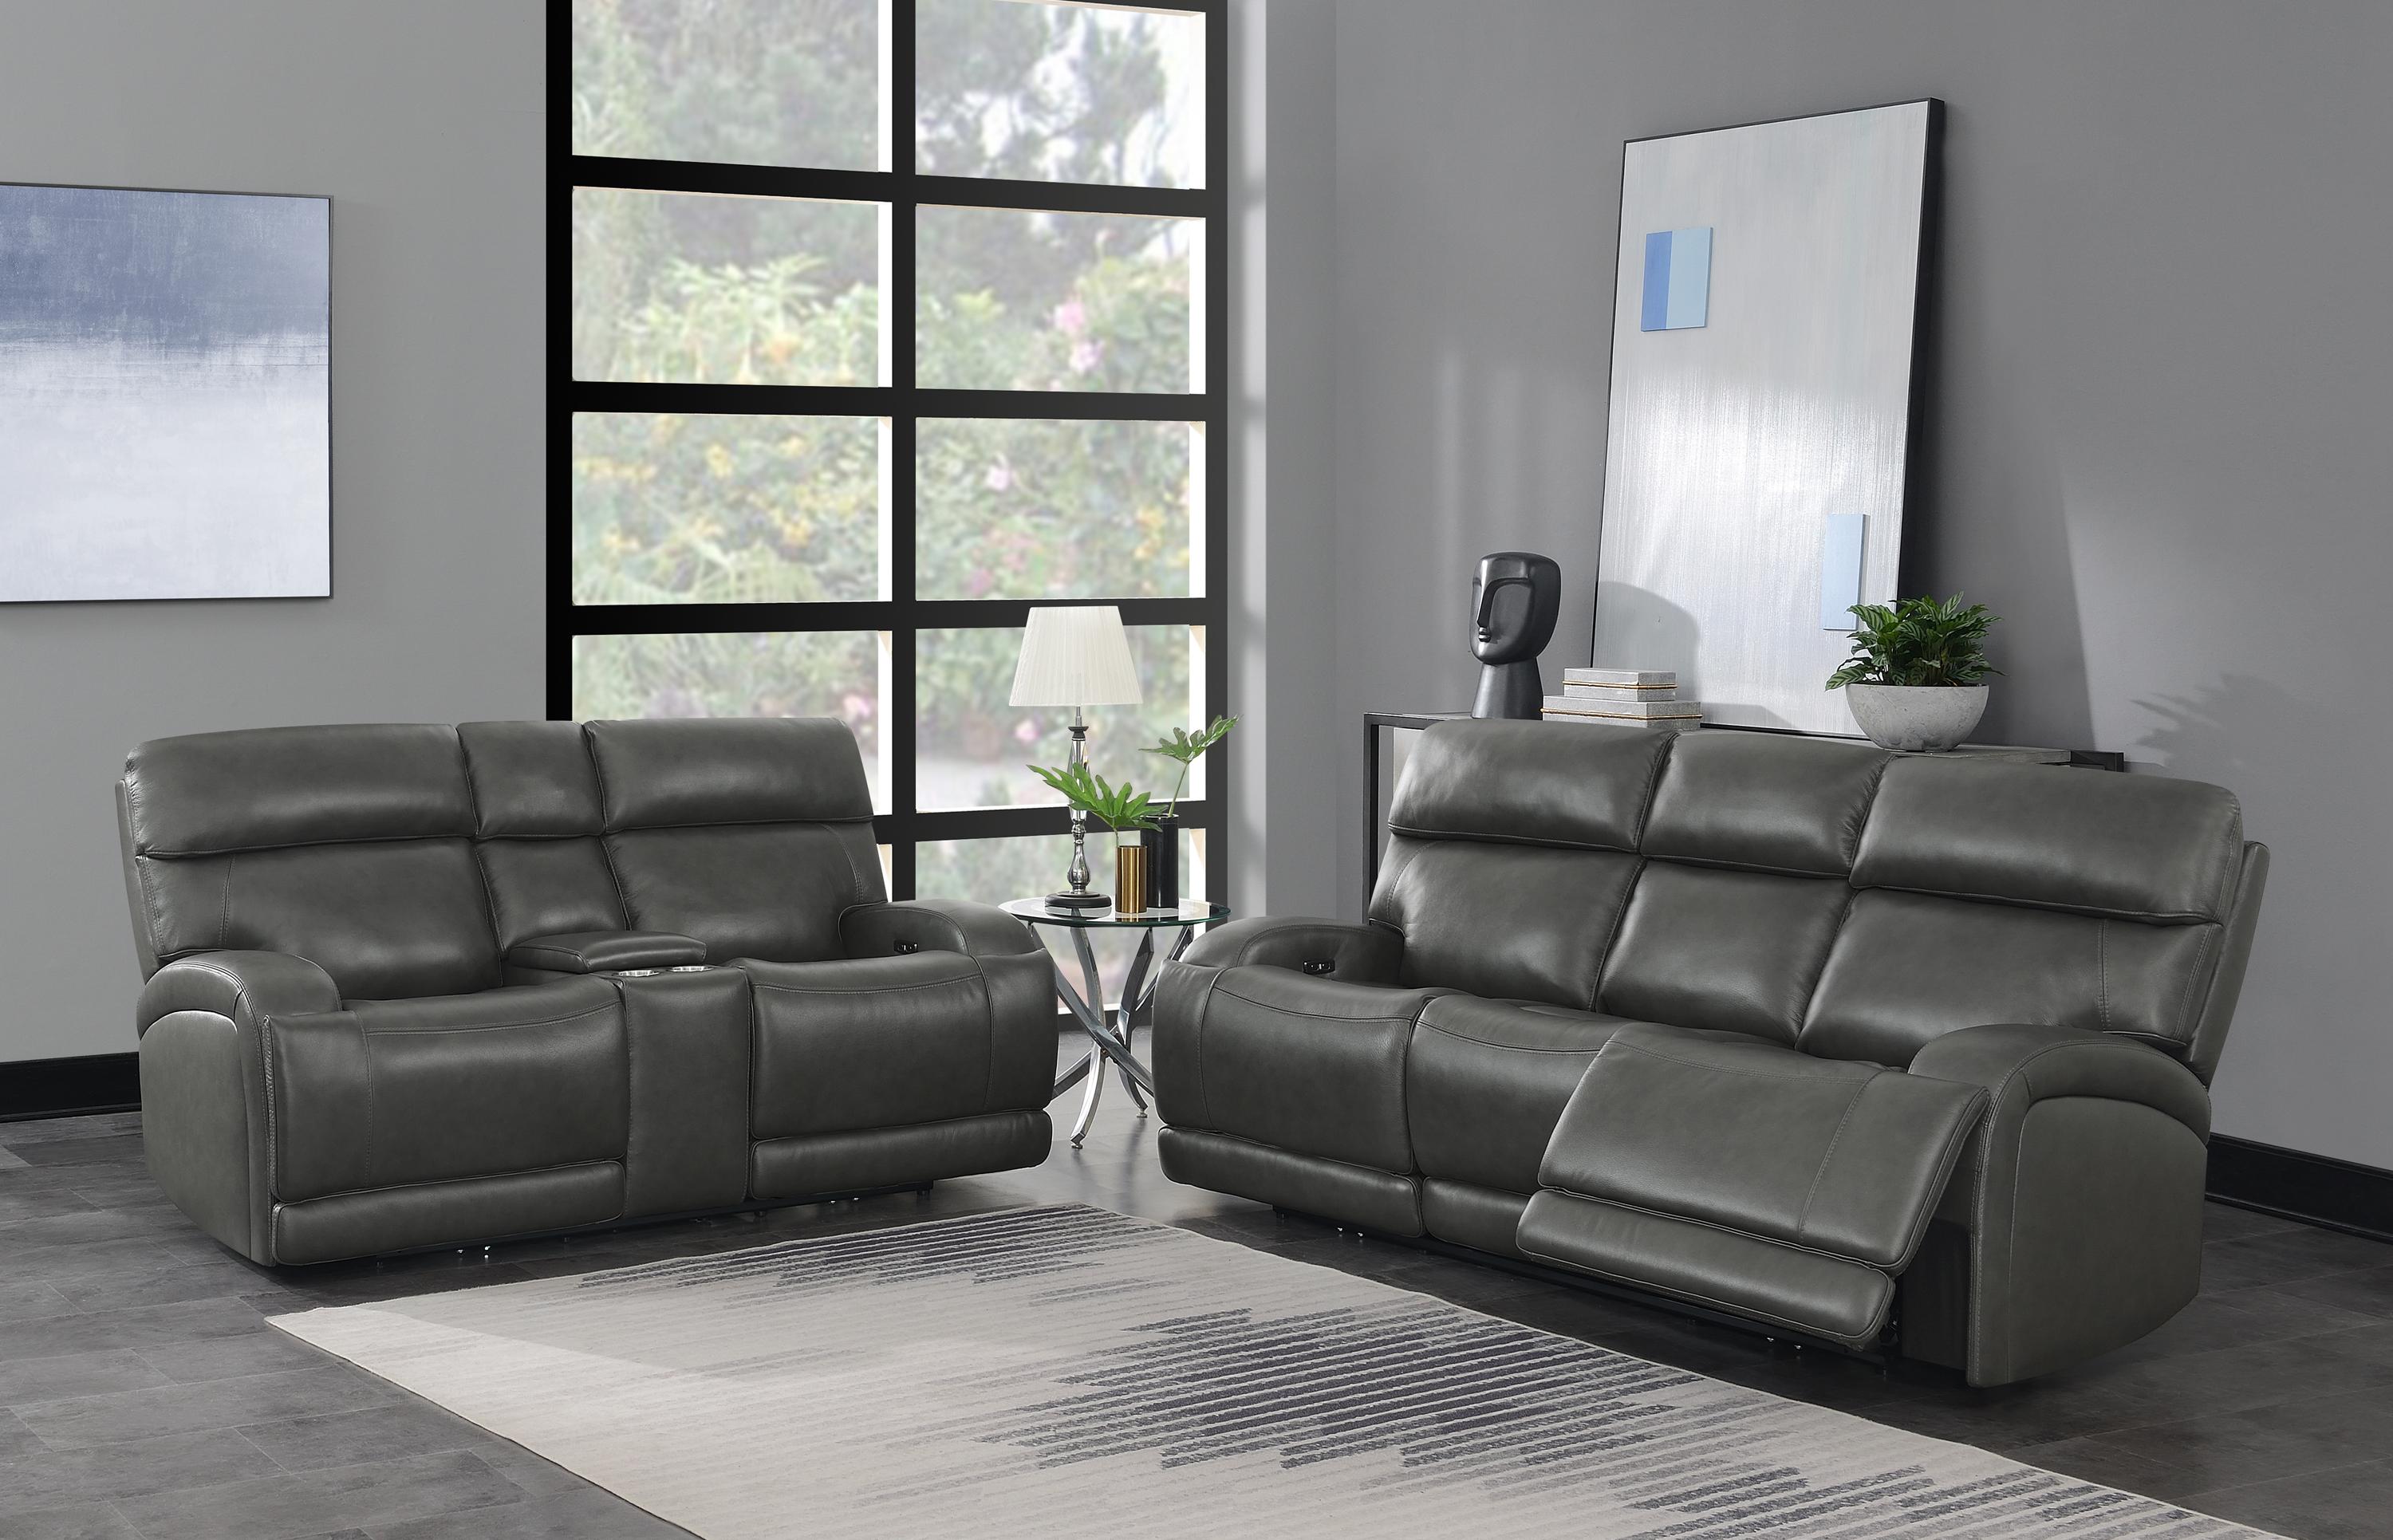 Modern Power Living Room Set 610484P-S2 Longport 610484P-S2 in Charcoal Top grain leather